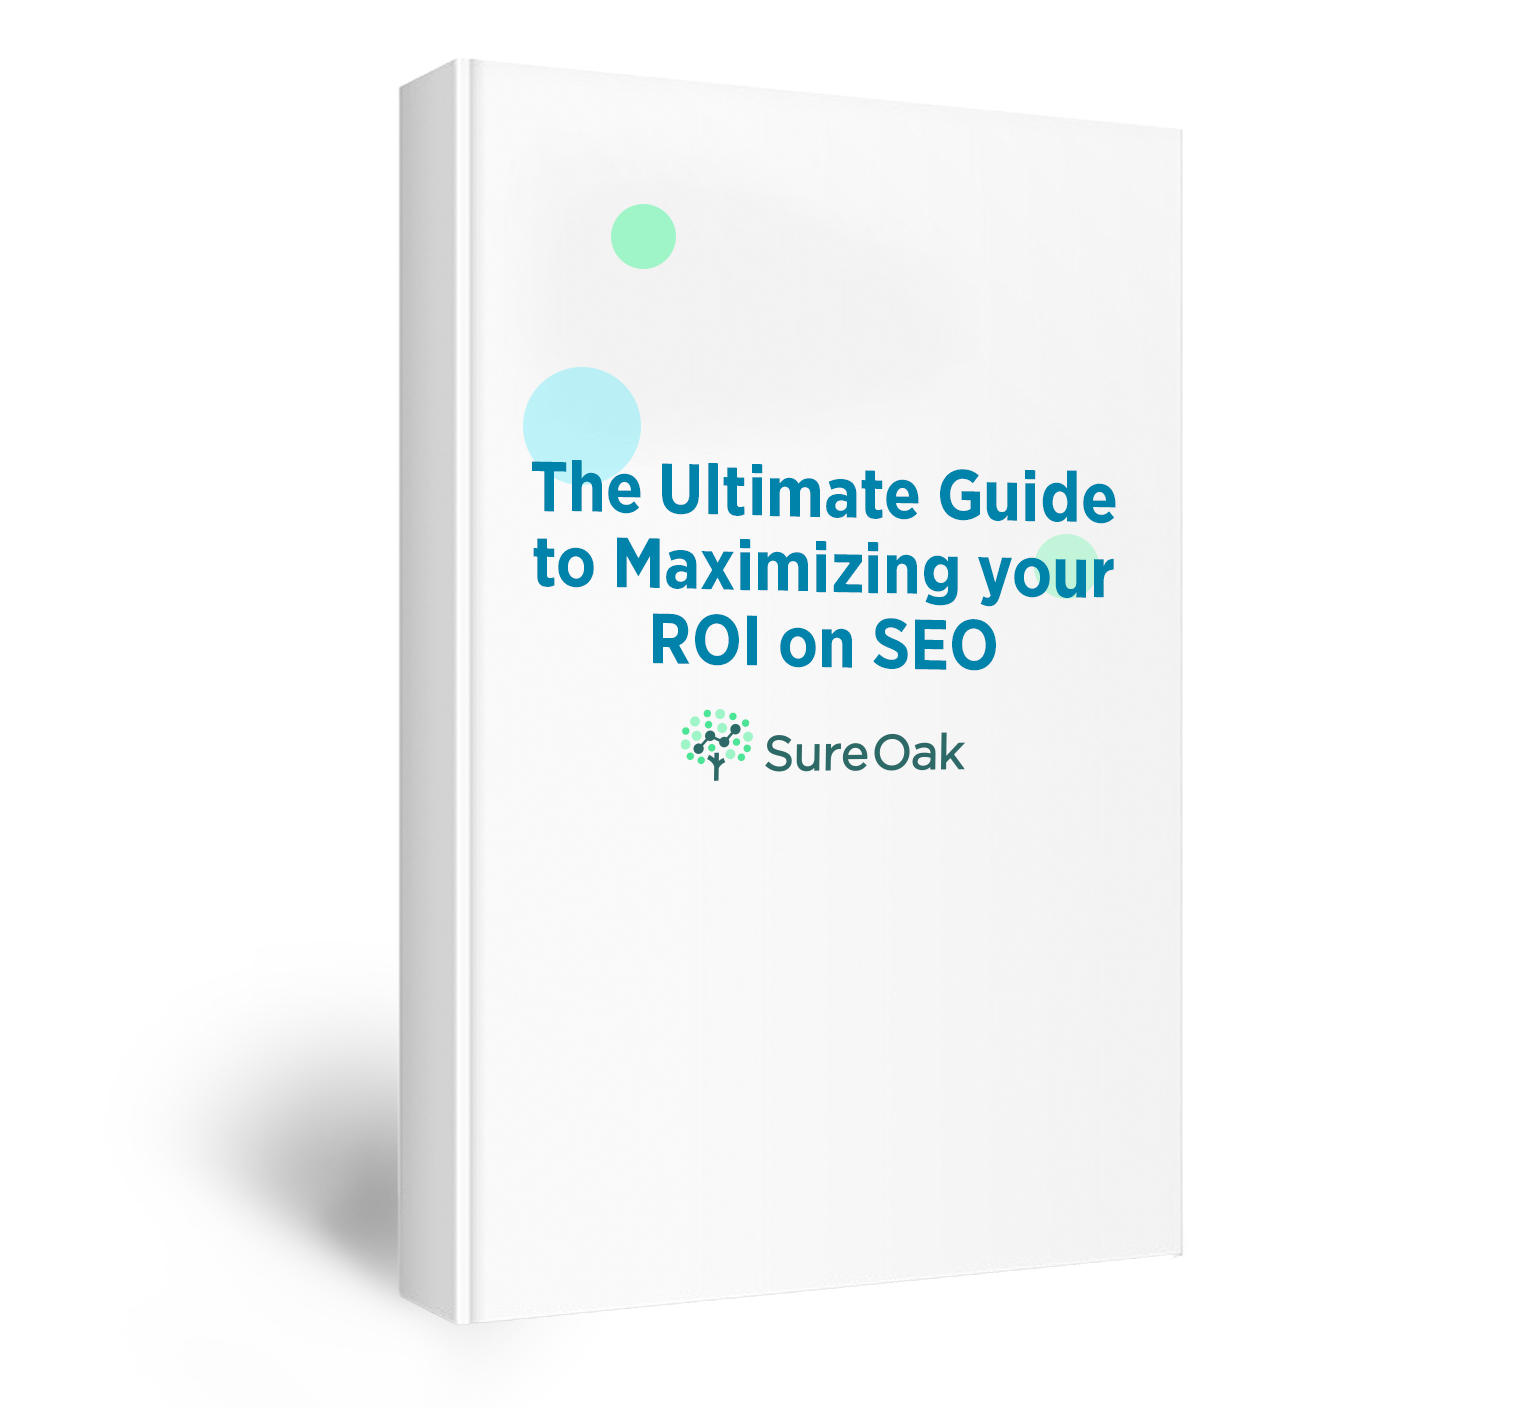 The Ultimate Guide to Maximizing Your ROI on SEO